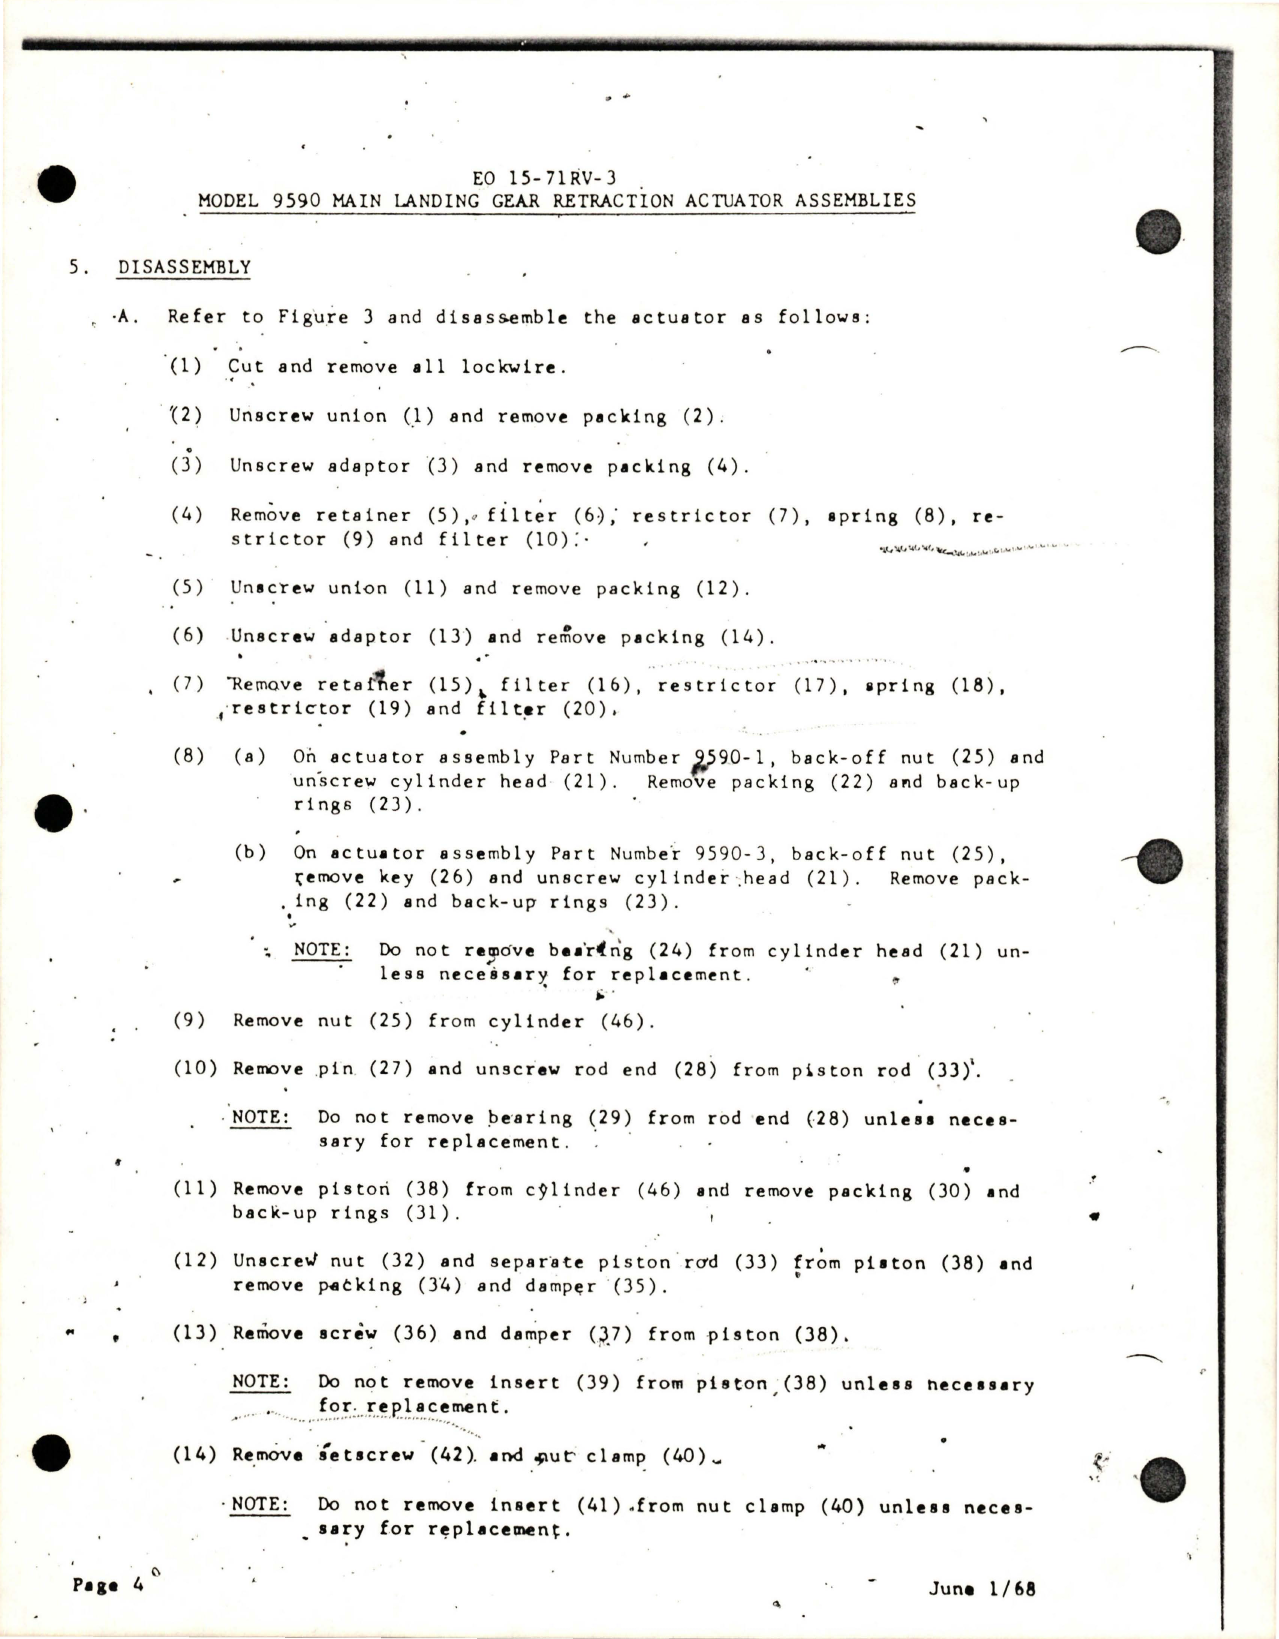 Sample page 7 from AirCorps Library document: Handbook with Parts List for Main Landing Gear Retraction Actuator Assemblies - Parts 9590-1 and 9590-3